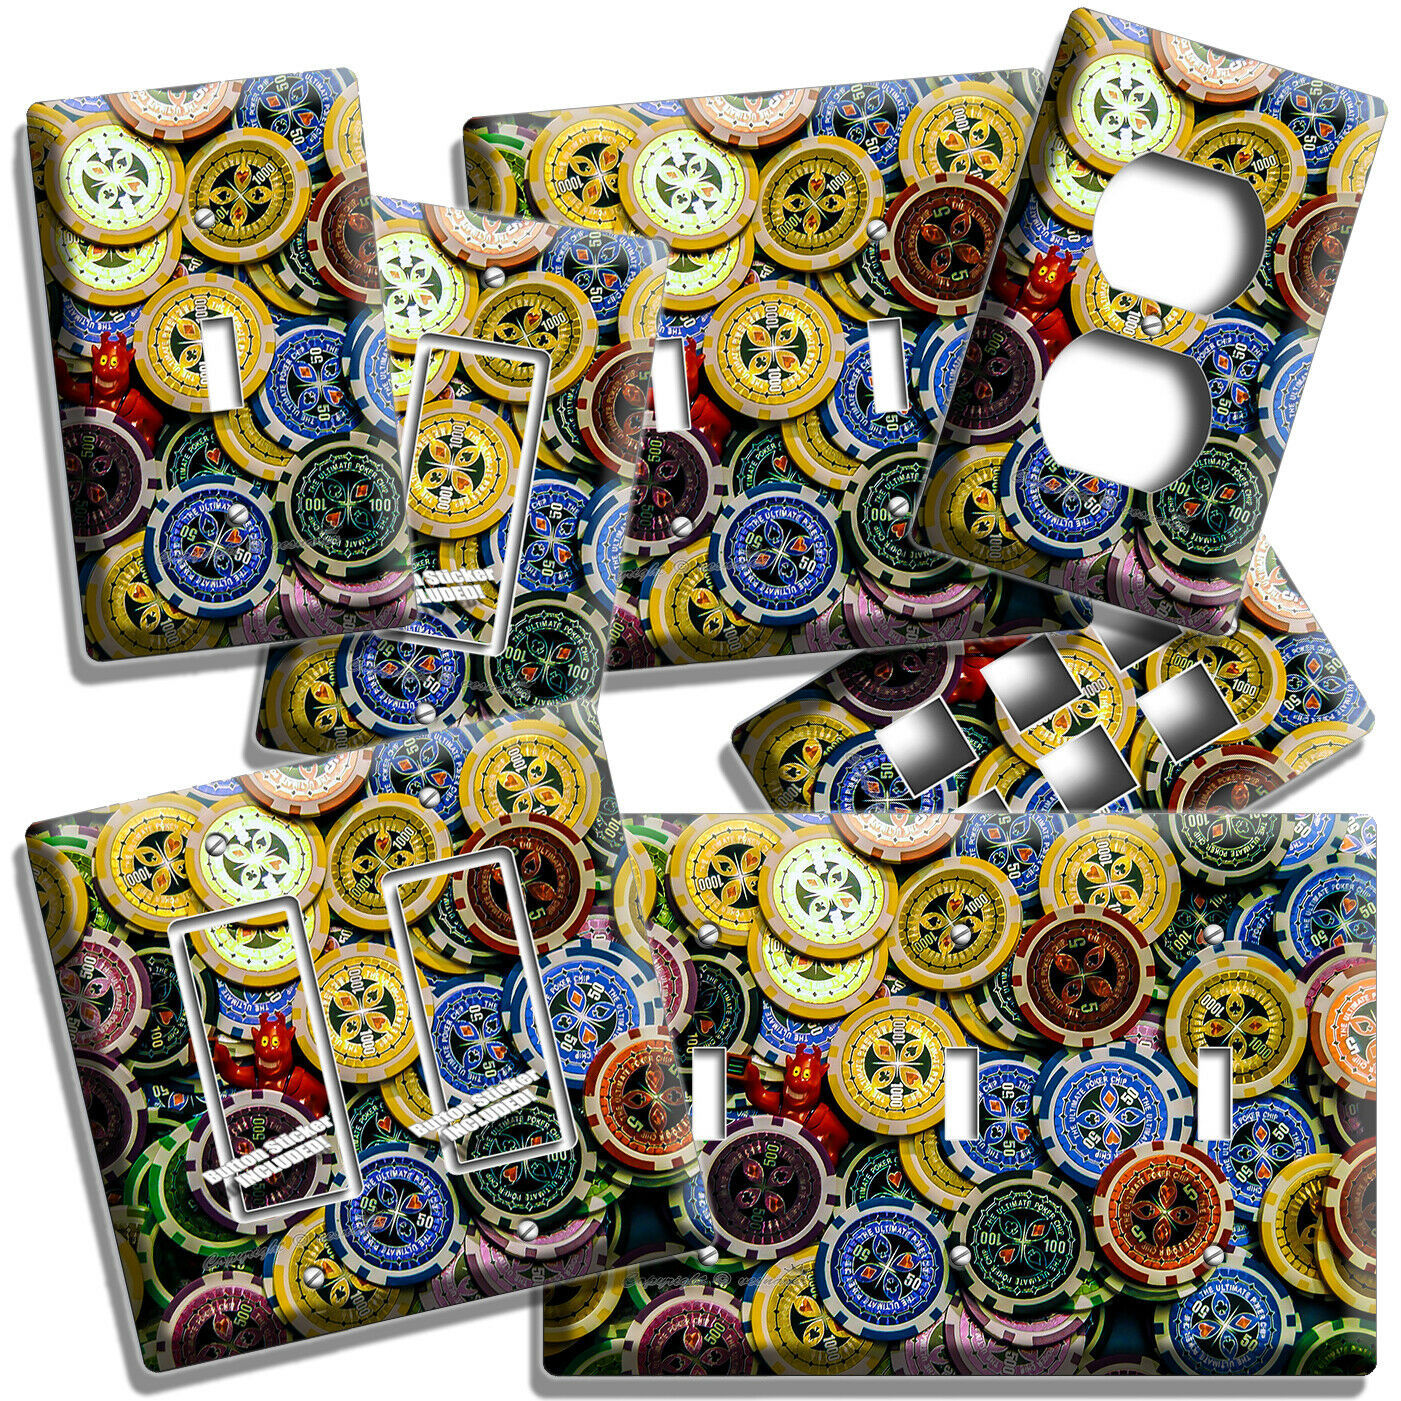 POKER CHIPS CASINO ROULETTE CRAPS LIGHT SWITCH OUTLET WALL PLATES MAN CAVE DECOR